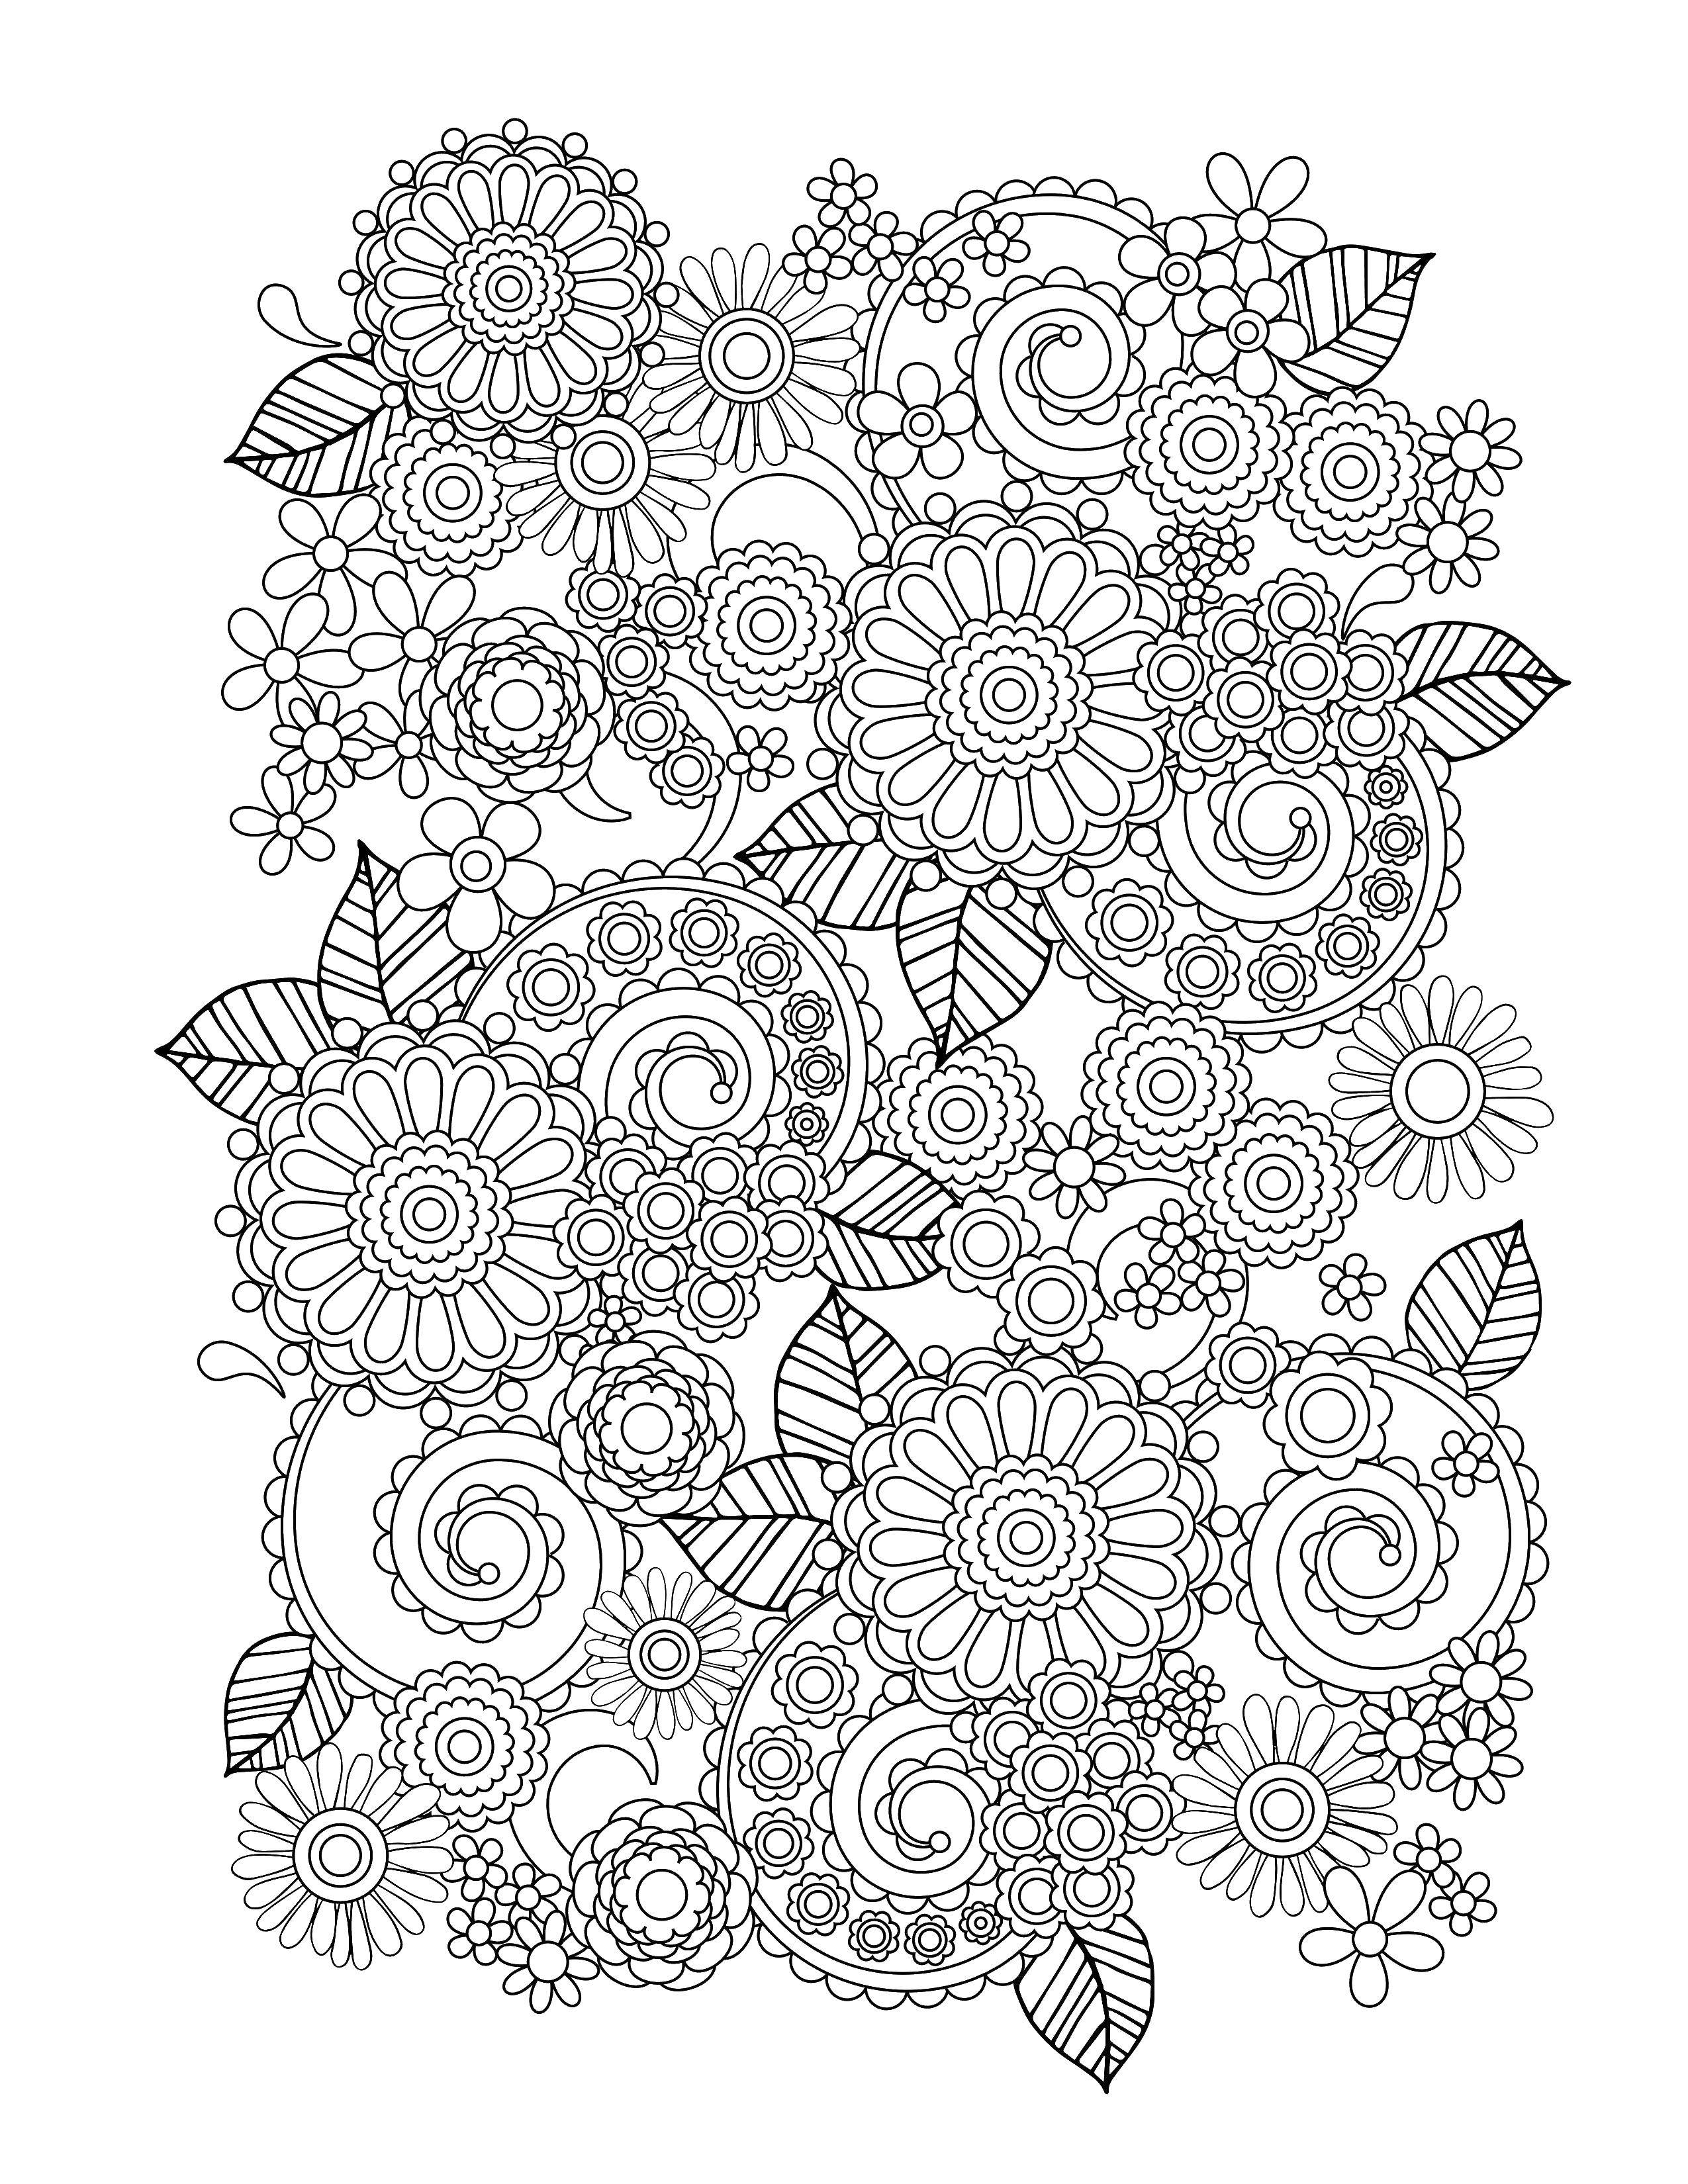 Coloring Pattern flowers. Category patterns. Tags:  patterns, flowers.